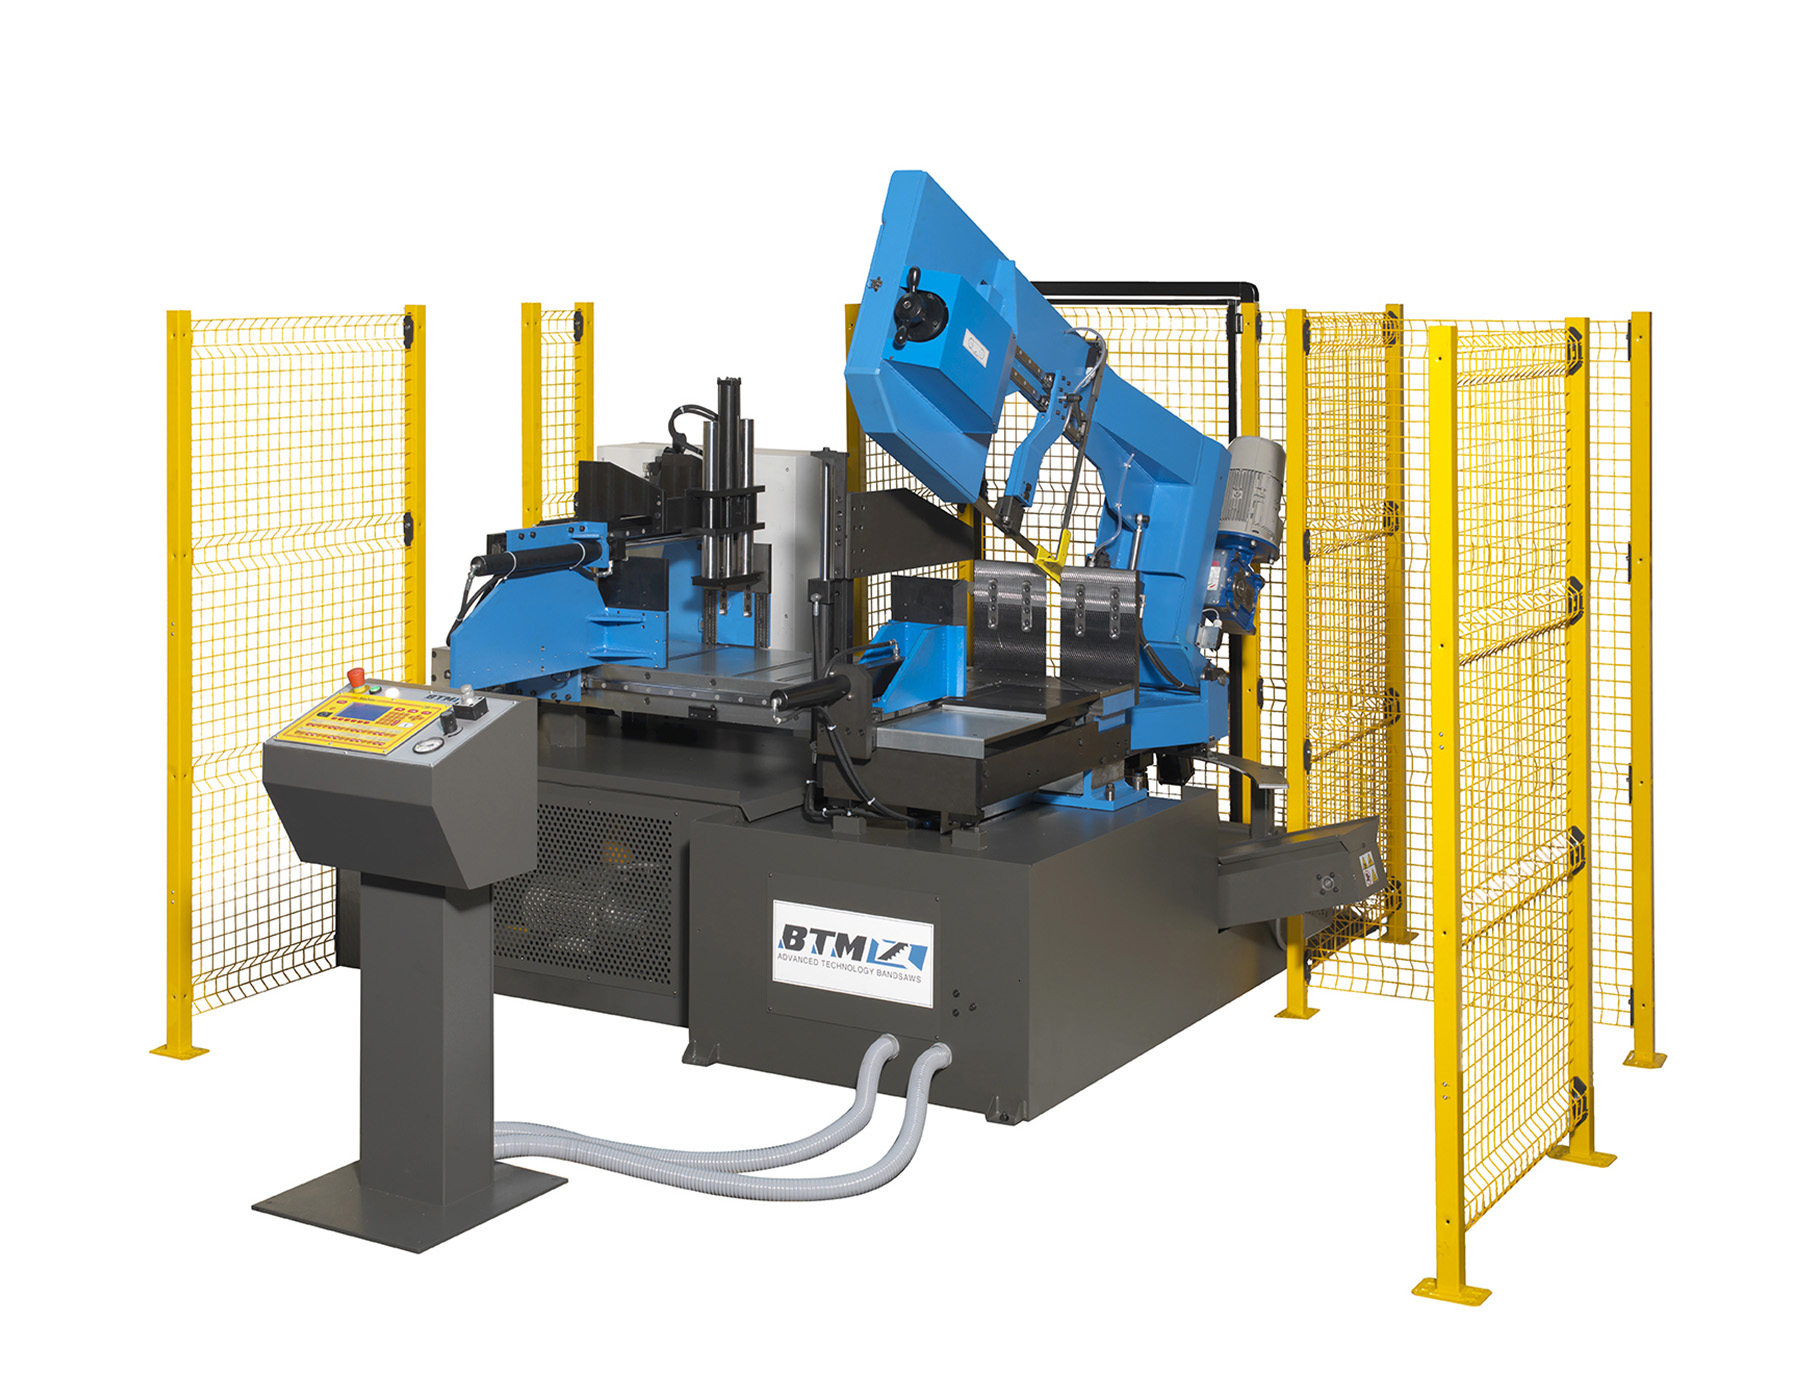 Automatic Pivoting rigt cut bandsaw